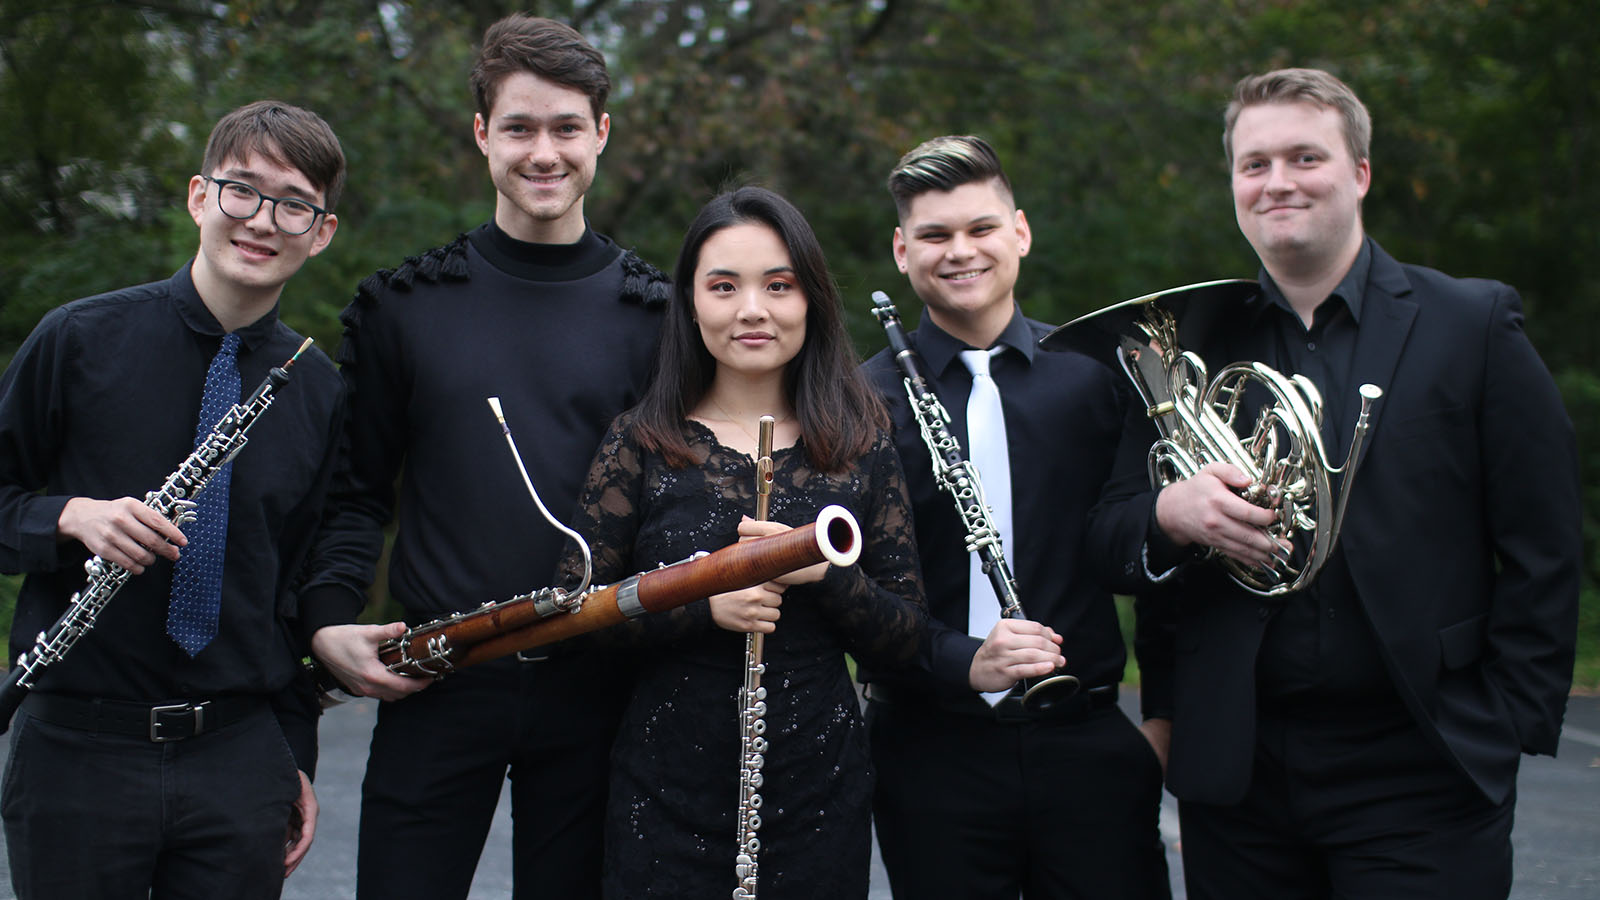 Ignis graduate fellowship woodwind quintet, from left to right: Nathaniel Wolff with an oboe, Christian Whitacre with a bassoon, Danielle Kim with a flute, Kyle Glasgow with a clarinet, and Zachary Miller with a French horn.